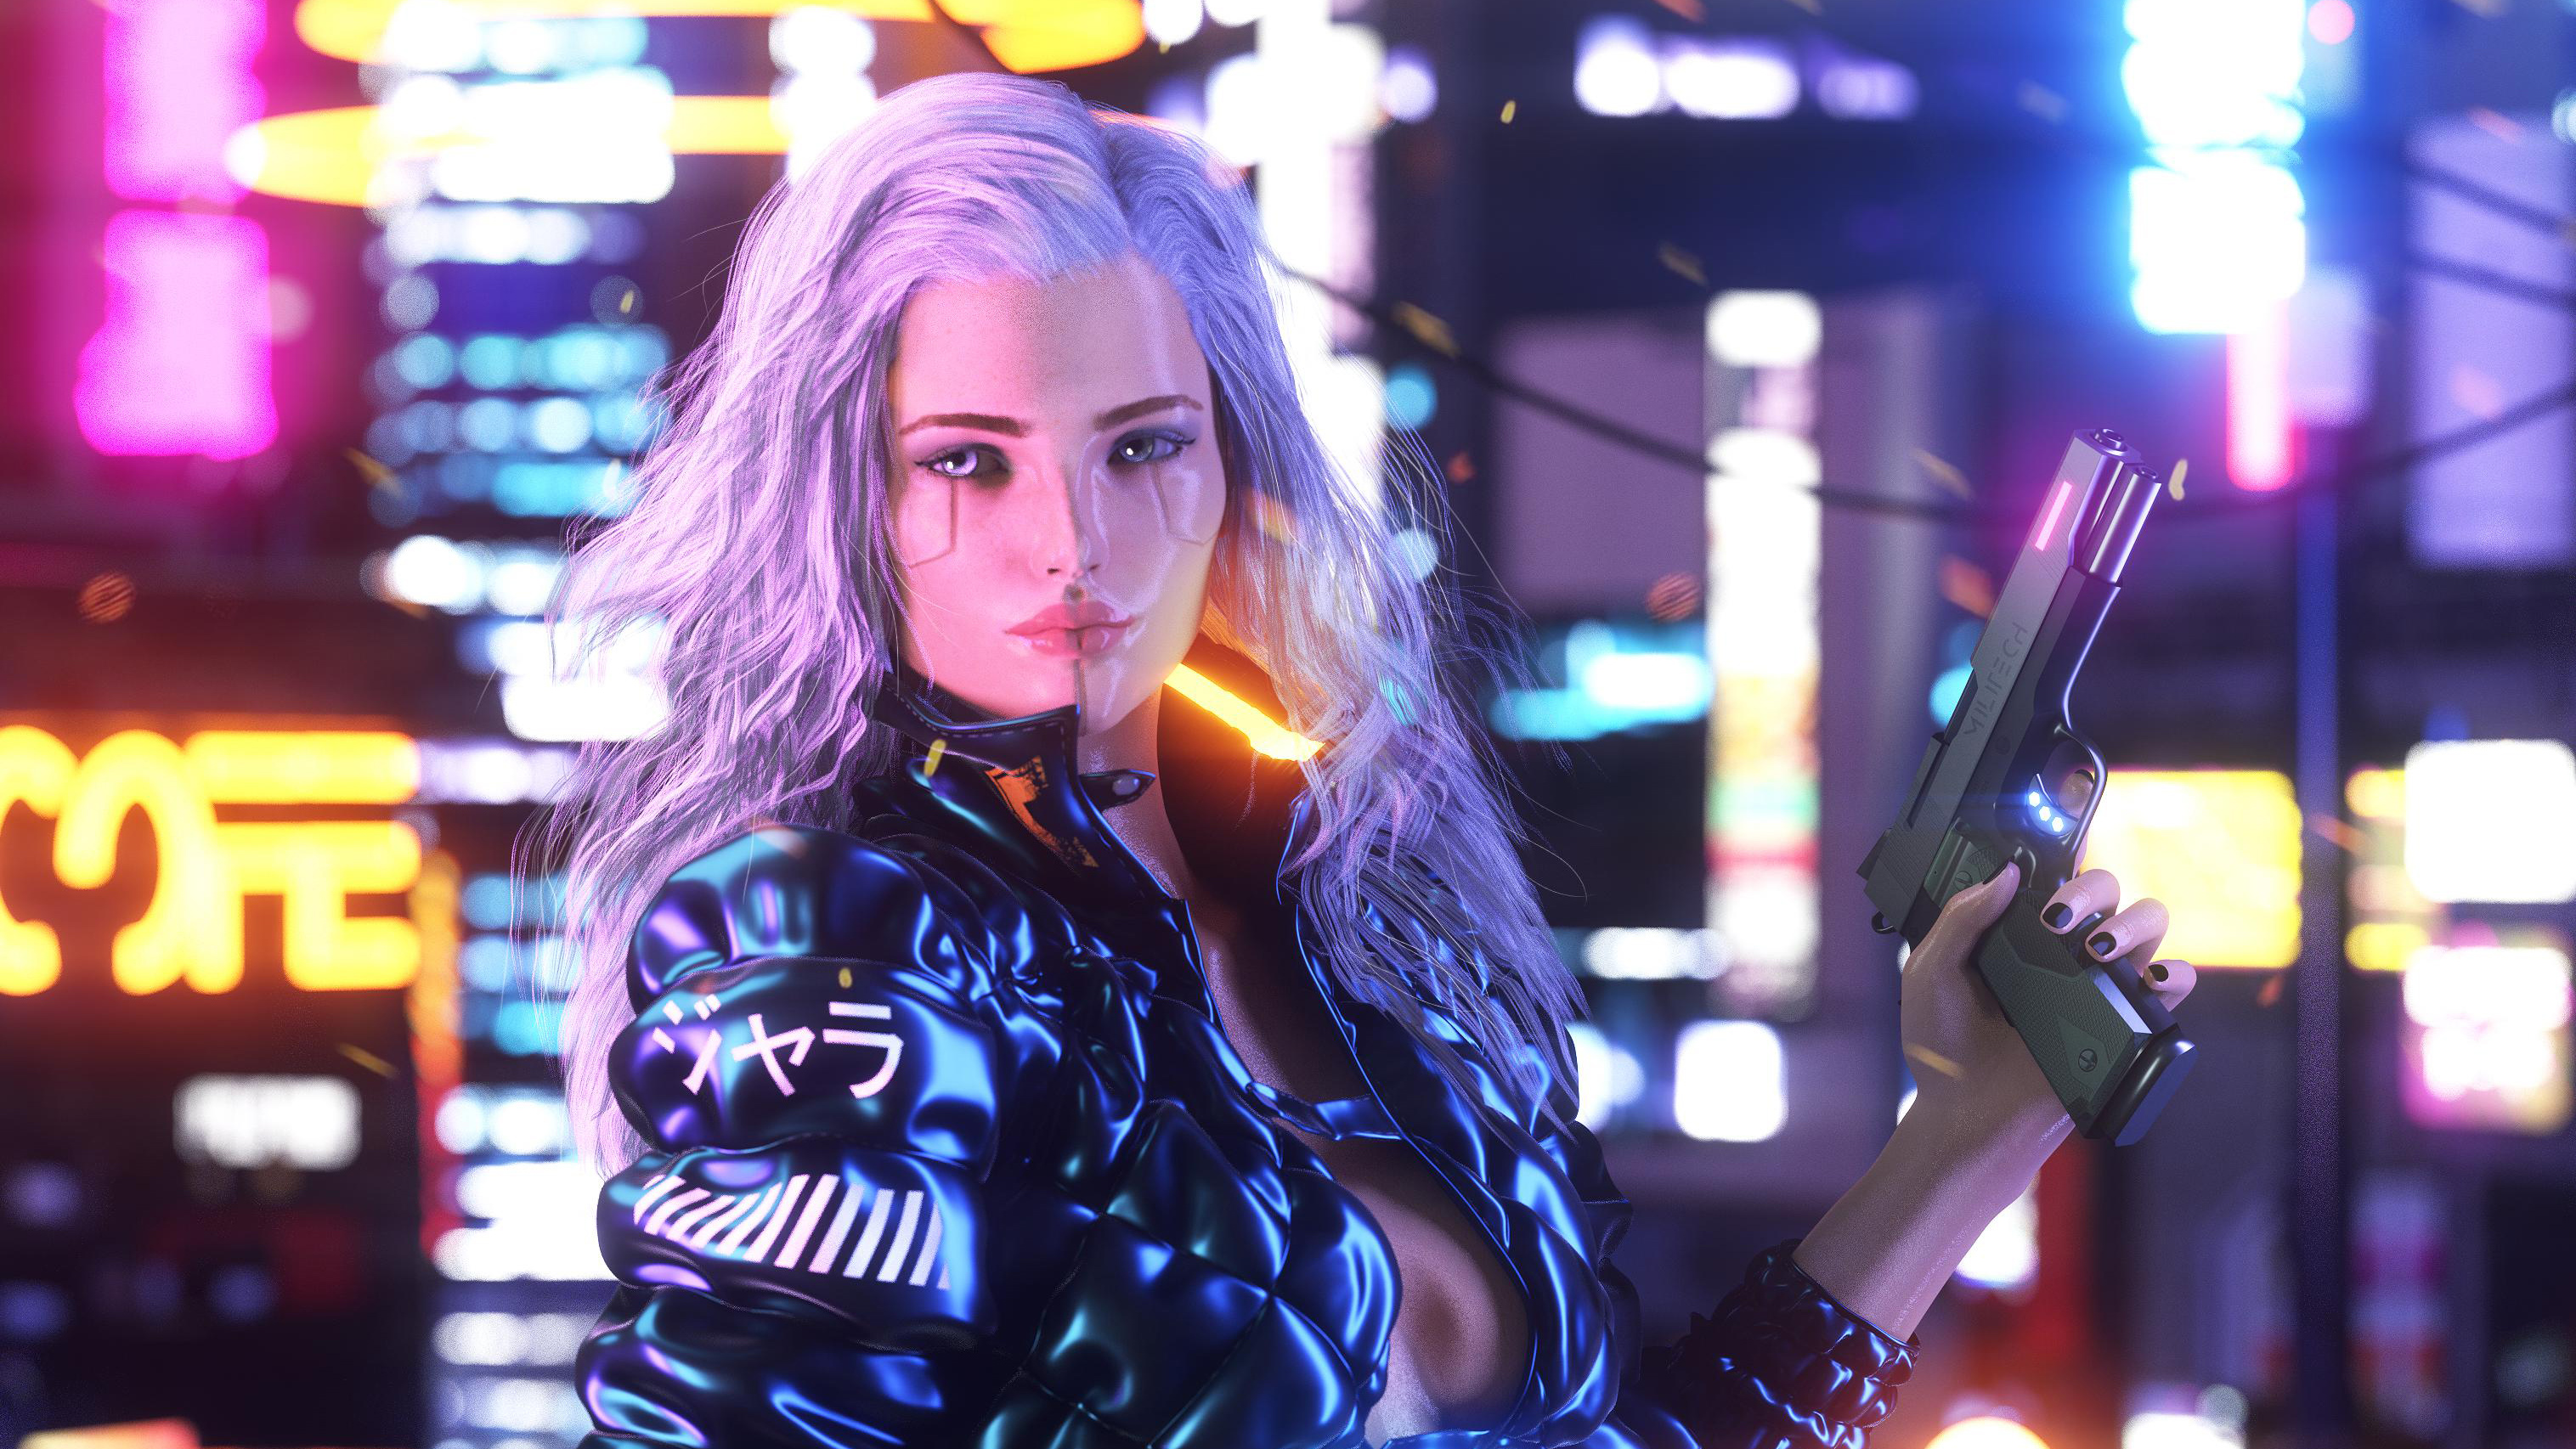 Cyberpunk Girl With Weapon Wallpapers